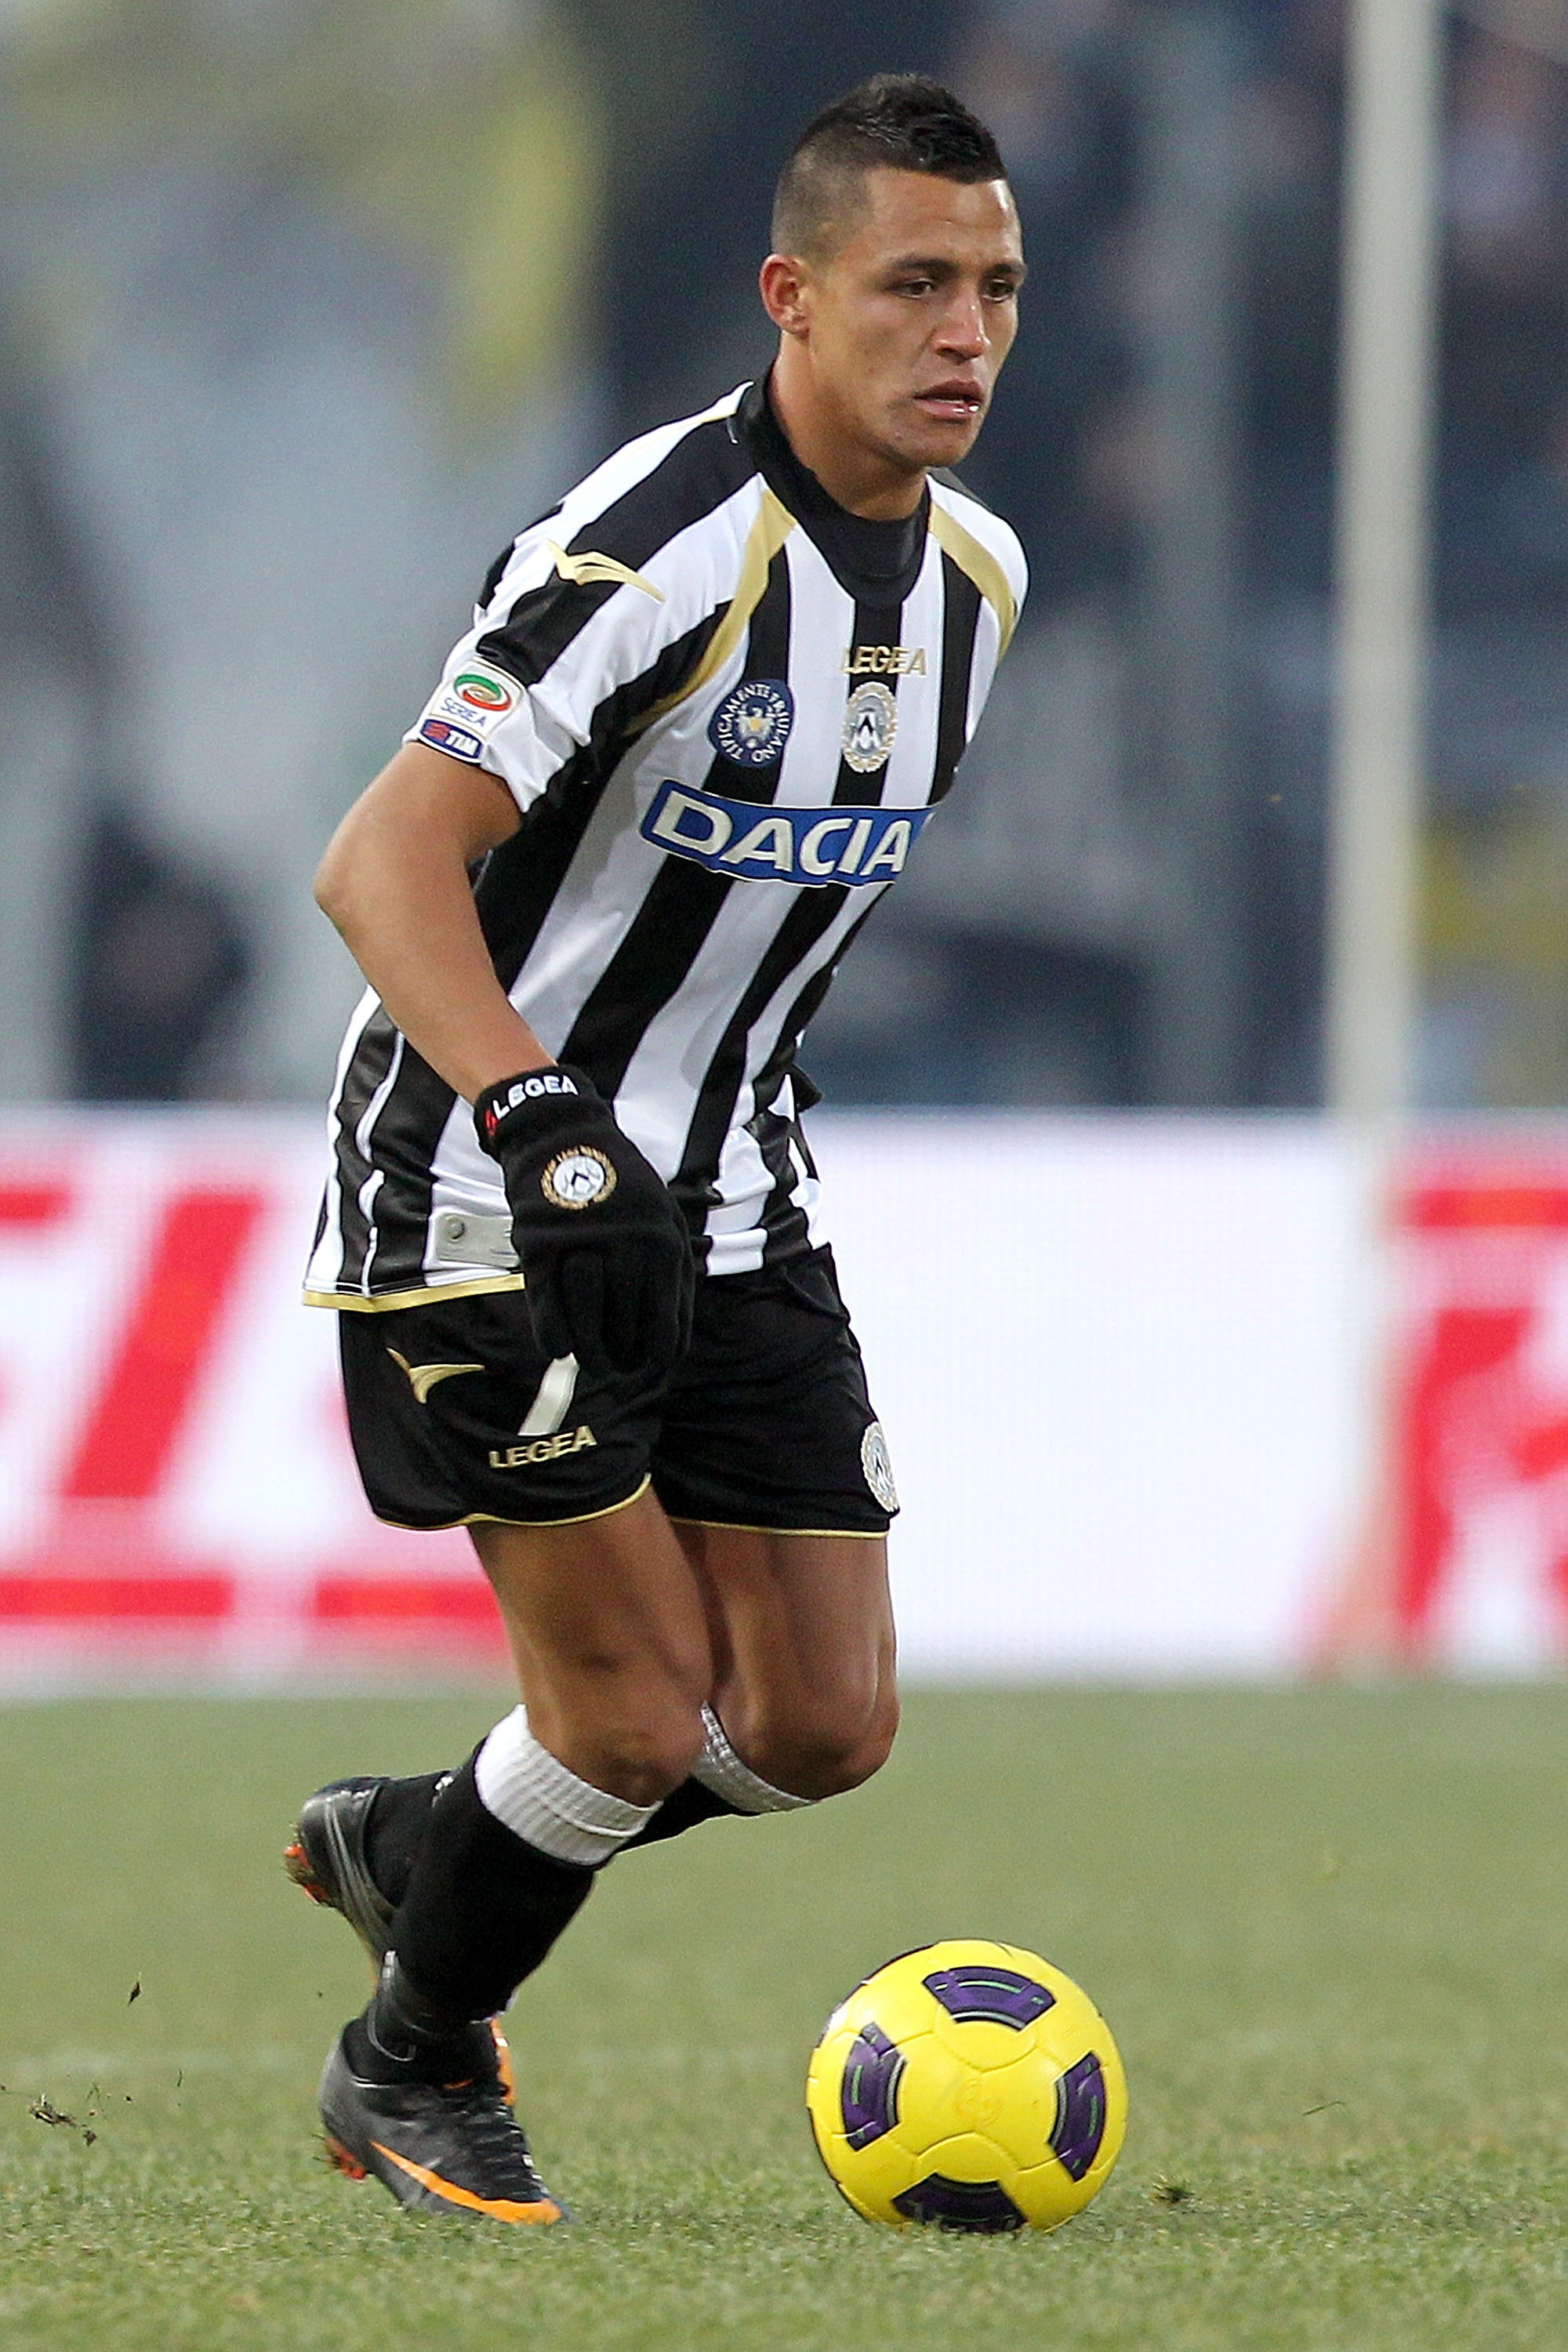 UDINE, ITALY - JANUARY 06: Alexis Sanchez of Udinese Calcio in action during the Serie A match between Udinese and Chievo at Stadio Friuli on January 6, 2011 in Udine, Italy.  (Photo by Gabriele Maltinti/Getty Images)